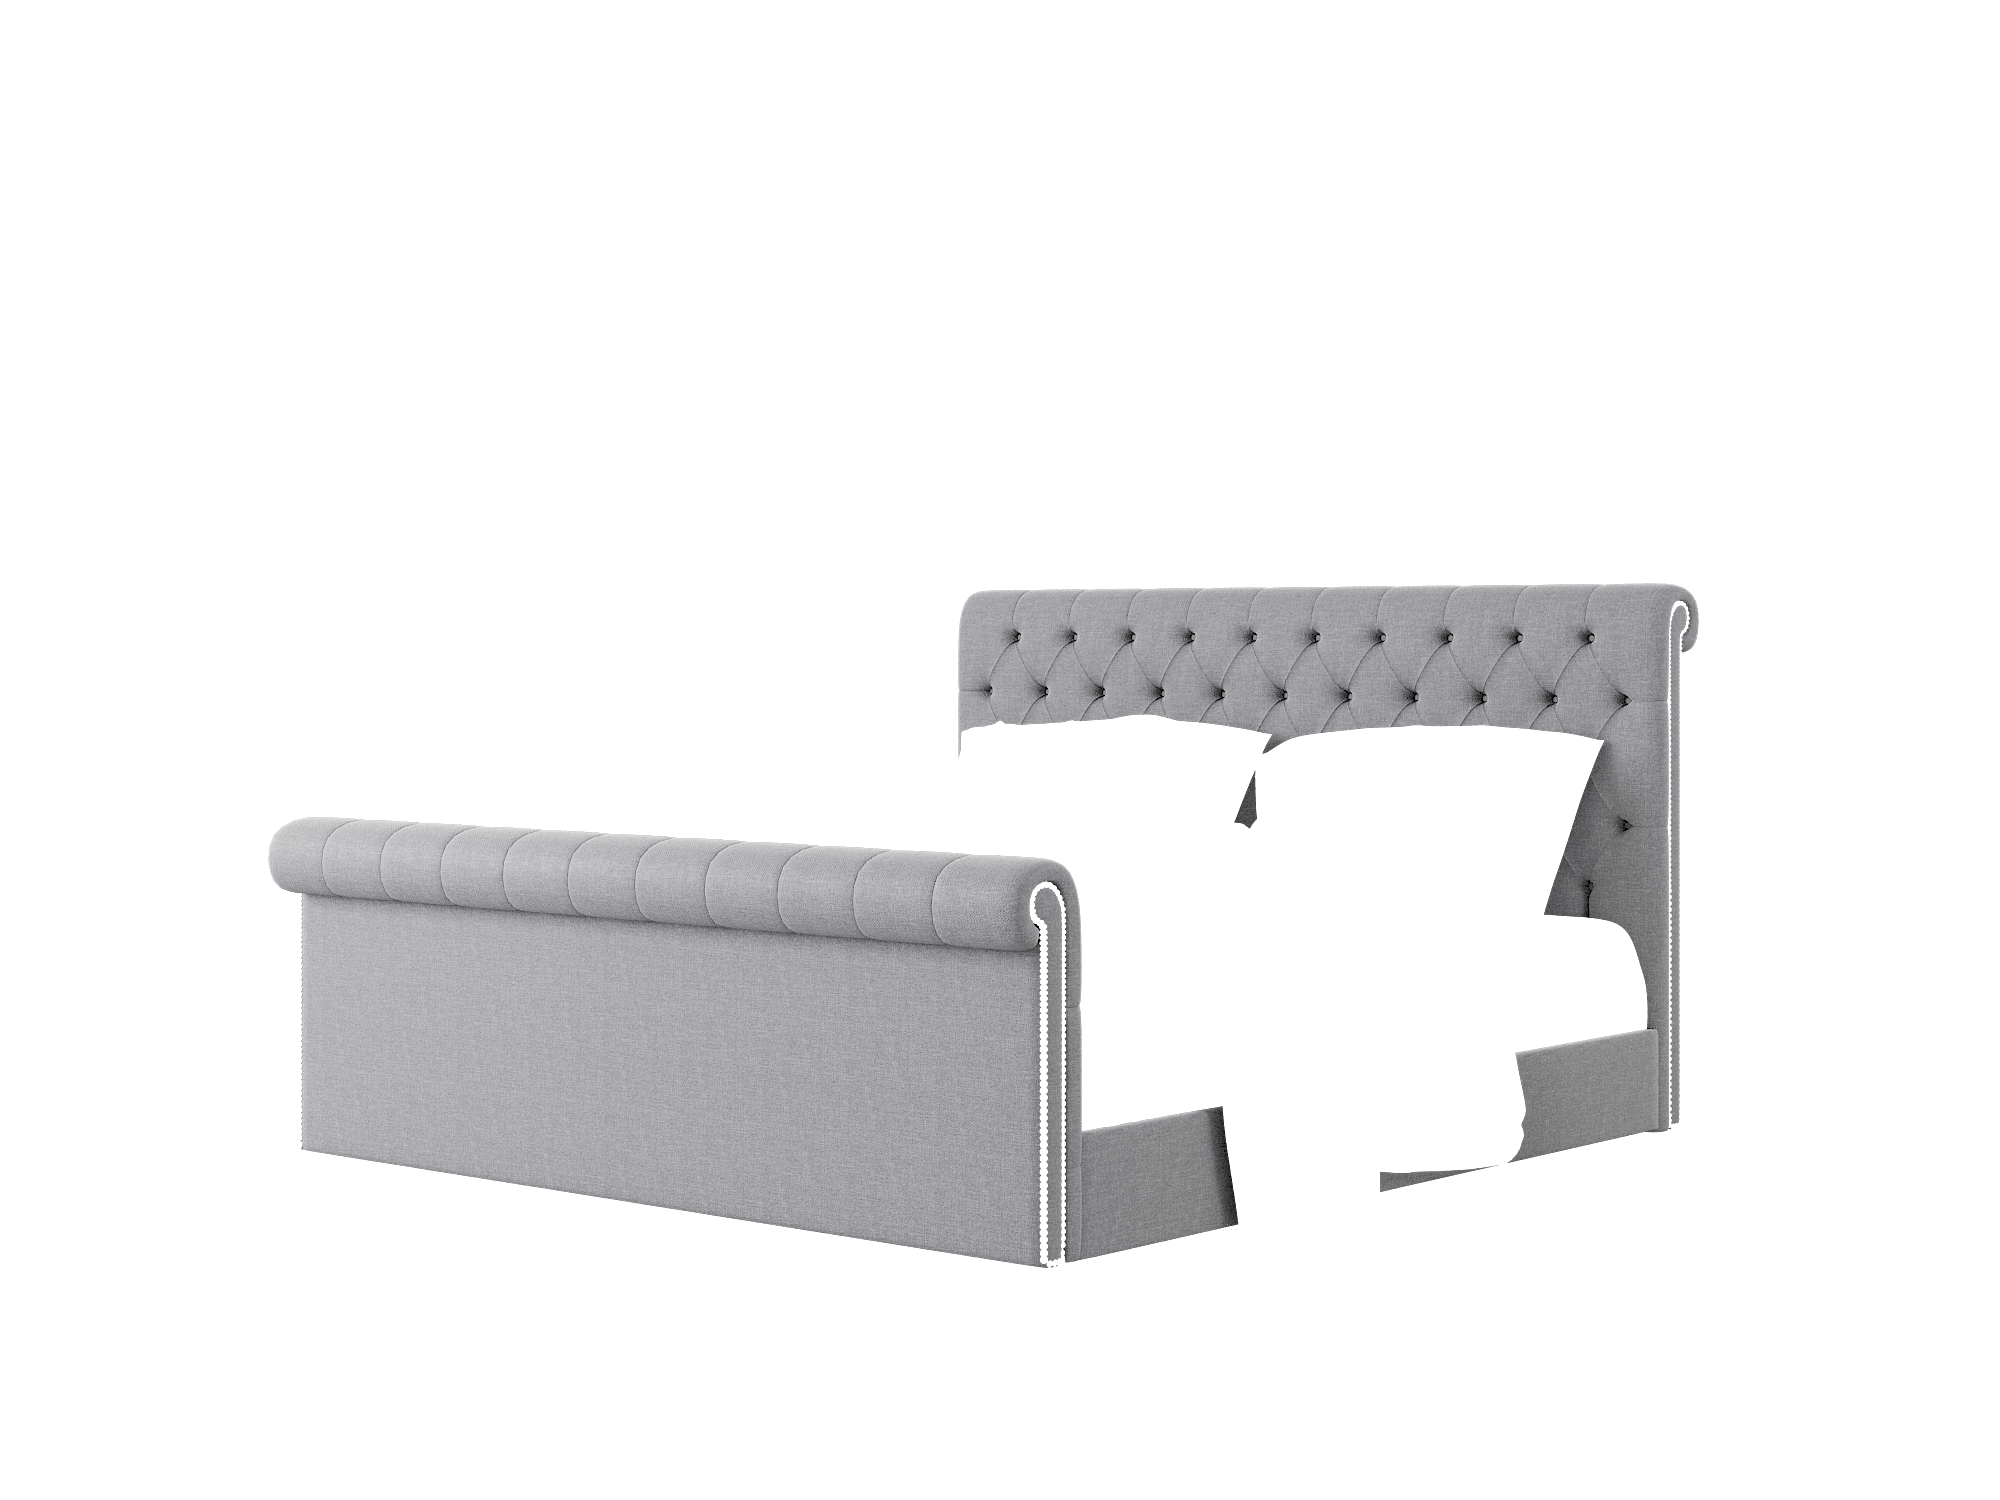 Kaila Notion Graphite Bed King Room Texture